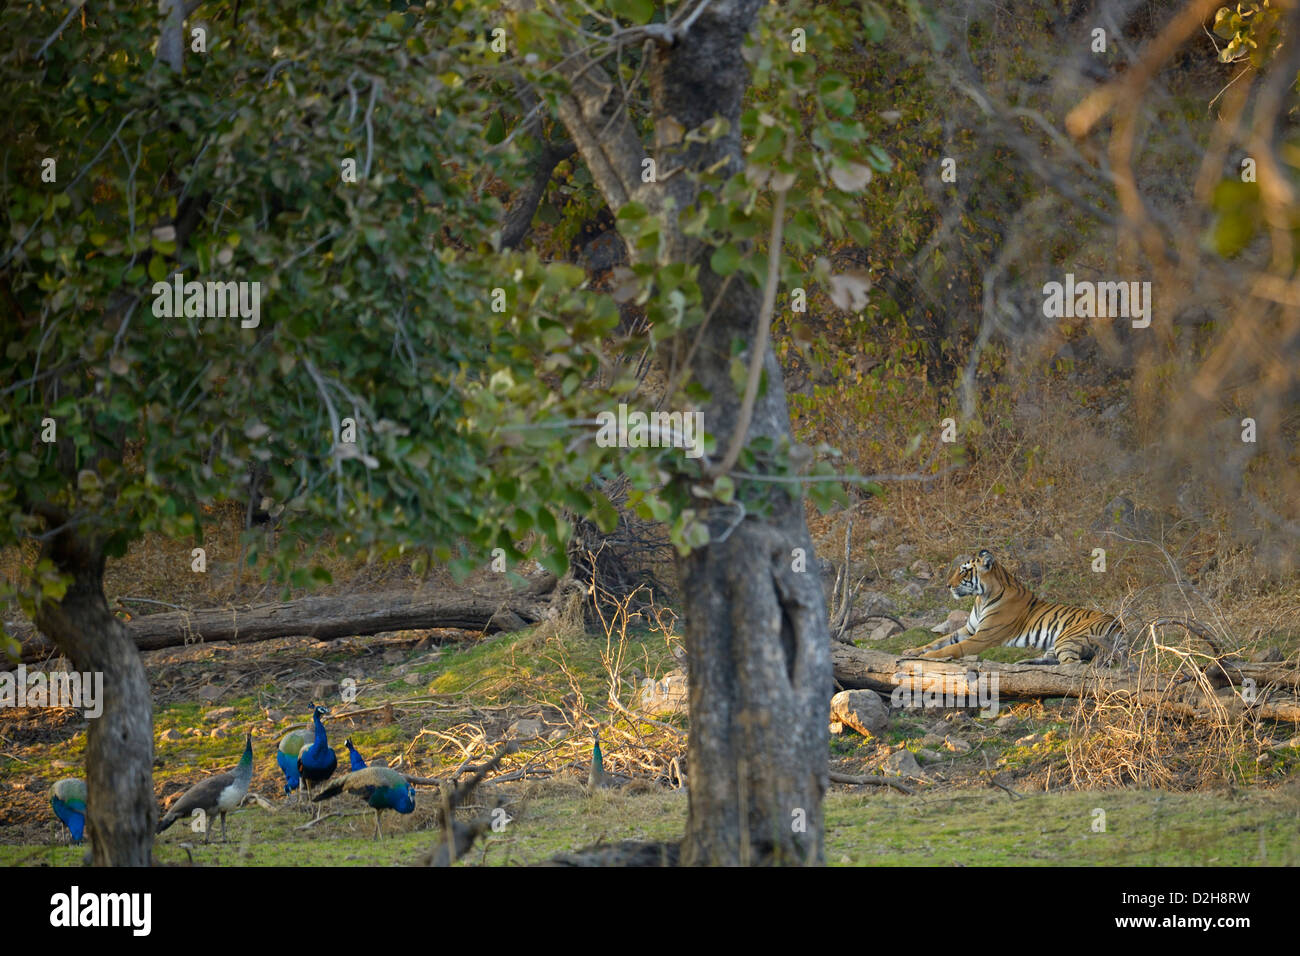 Tiger and a group of peacocks in the dry deciduous habitat of Ranthanbhore tiger reserve Stock Photo